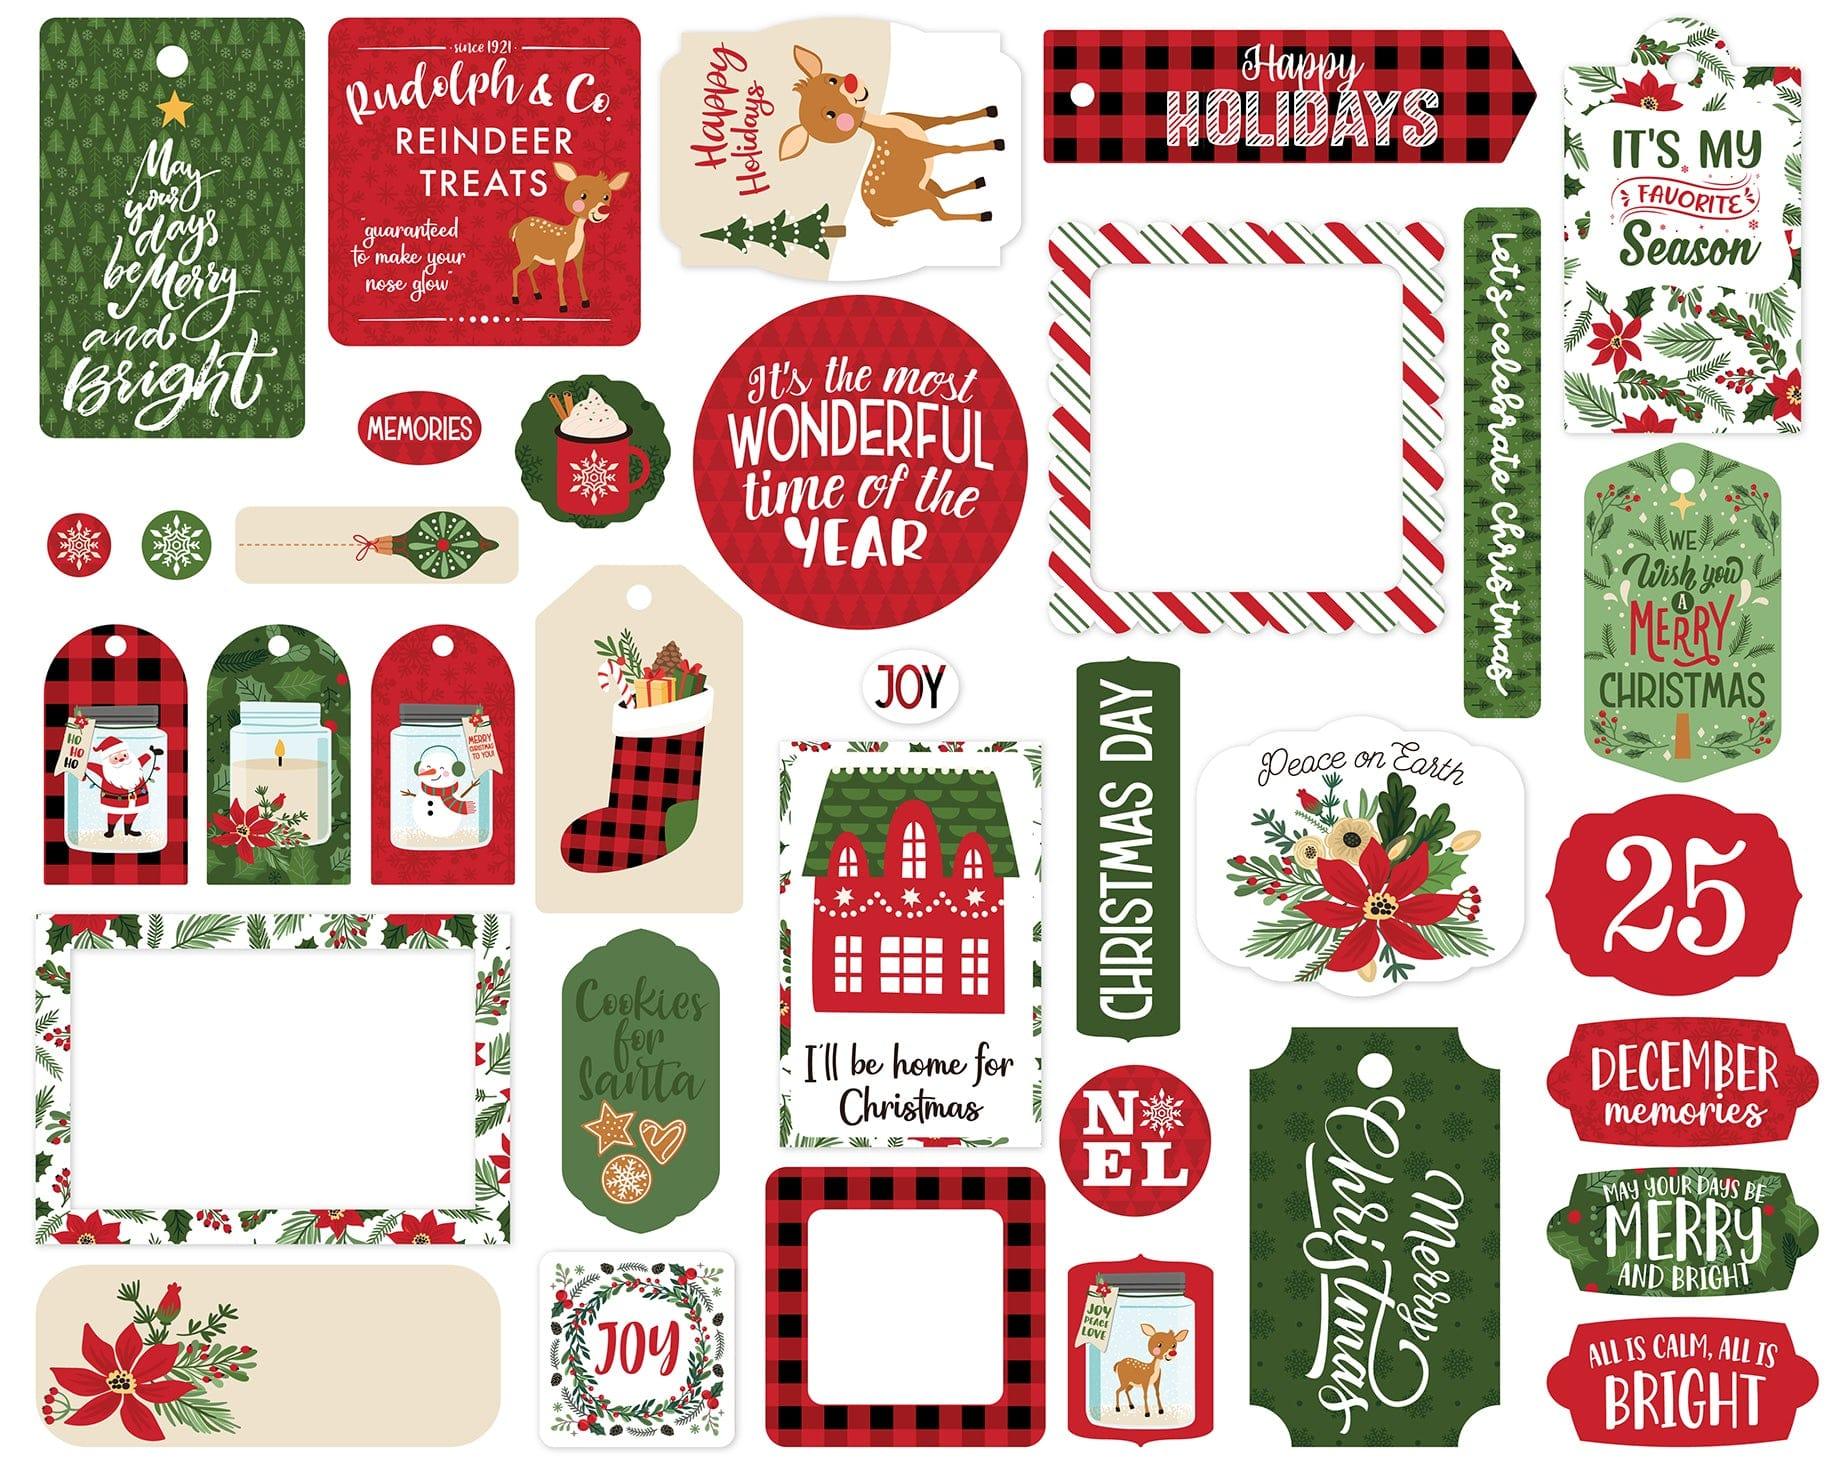 The Magic of Christmas Collection 5 x 5 Scrapbook Tags & Frames Die Cuts by Echo Park Paper - Scrapbook Supply Companies